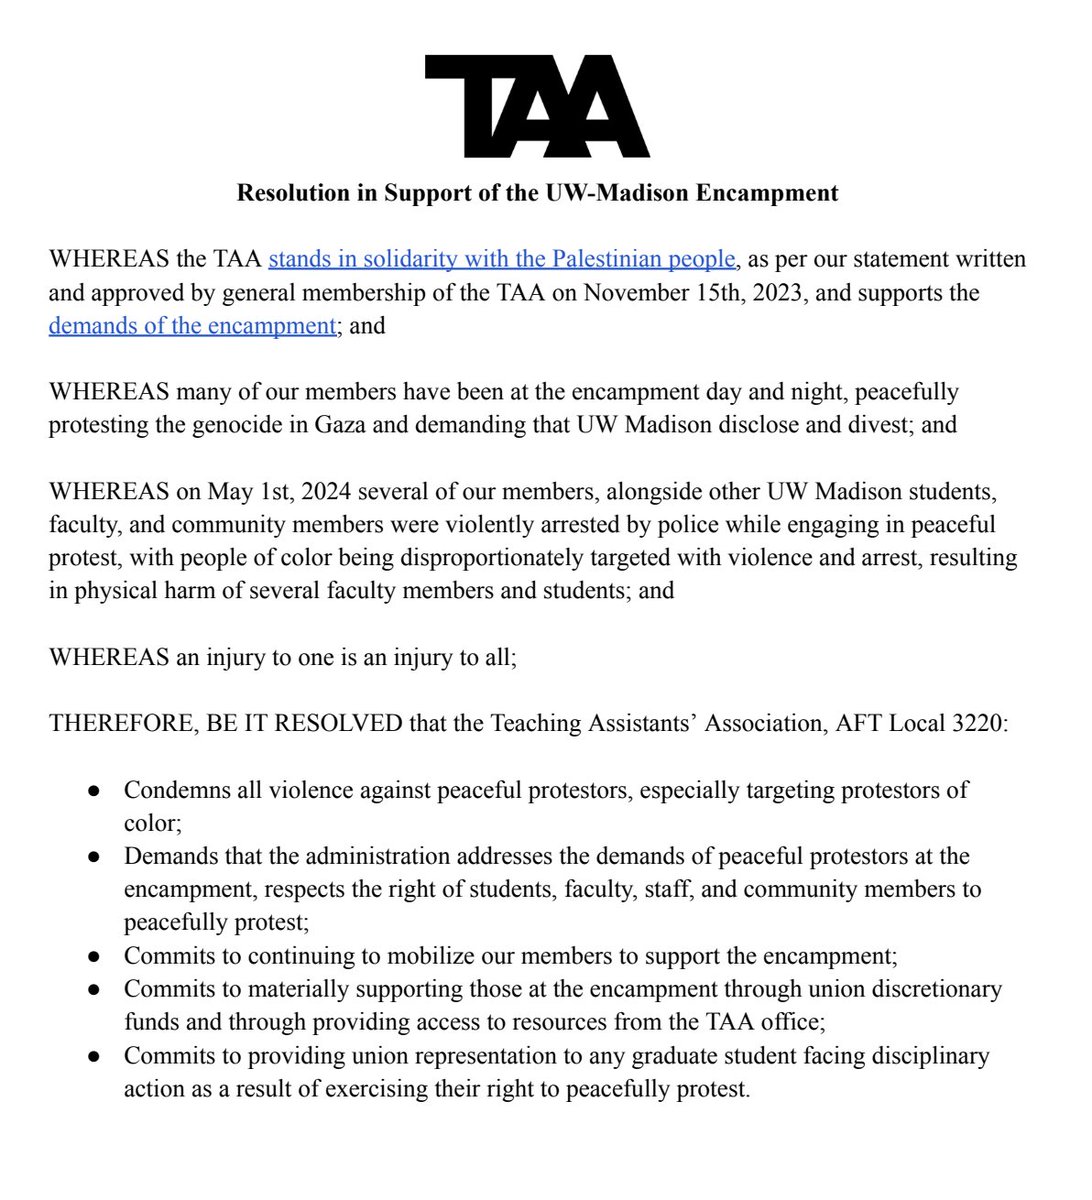 TAA Resolution in support of the UW-Madison Encampment